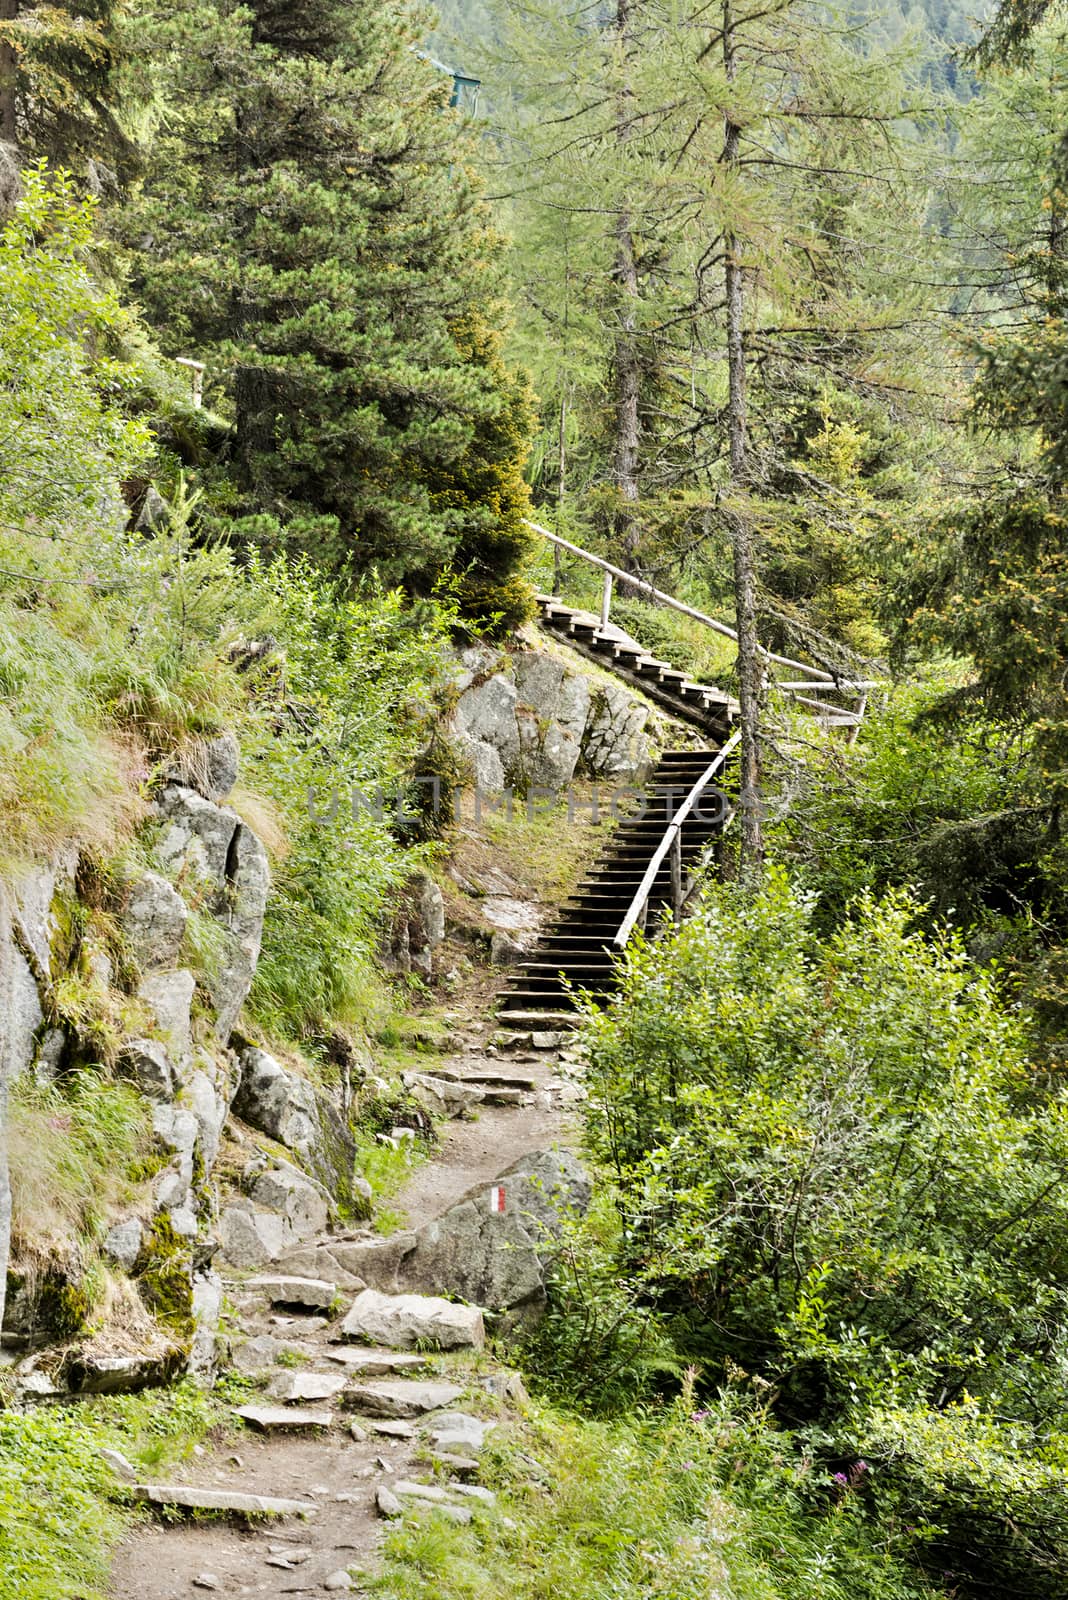 Mountain path with stair by Mdc1970